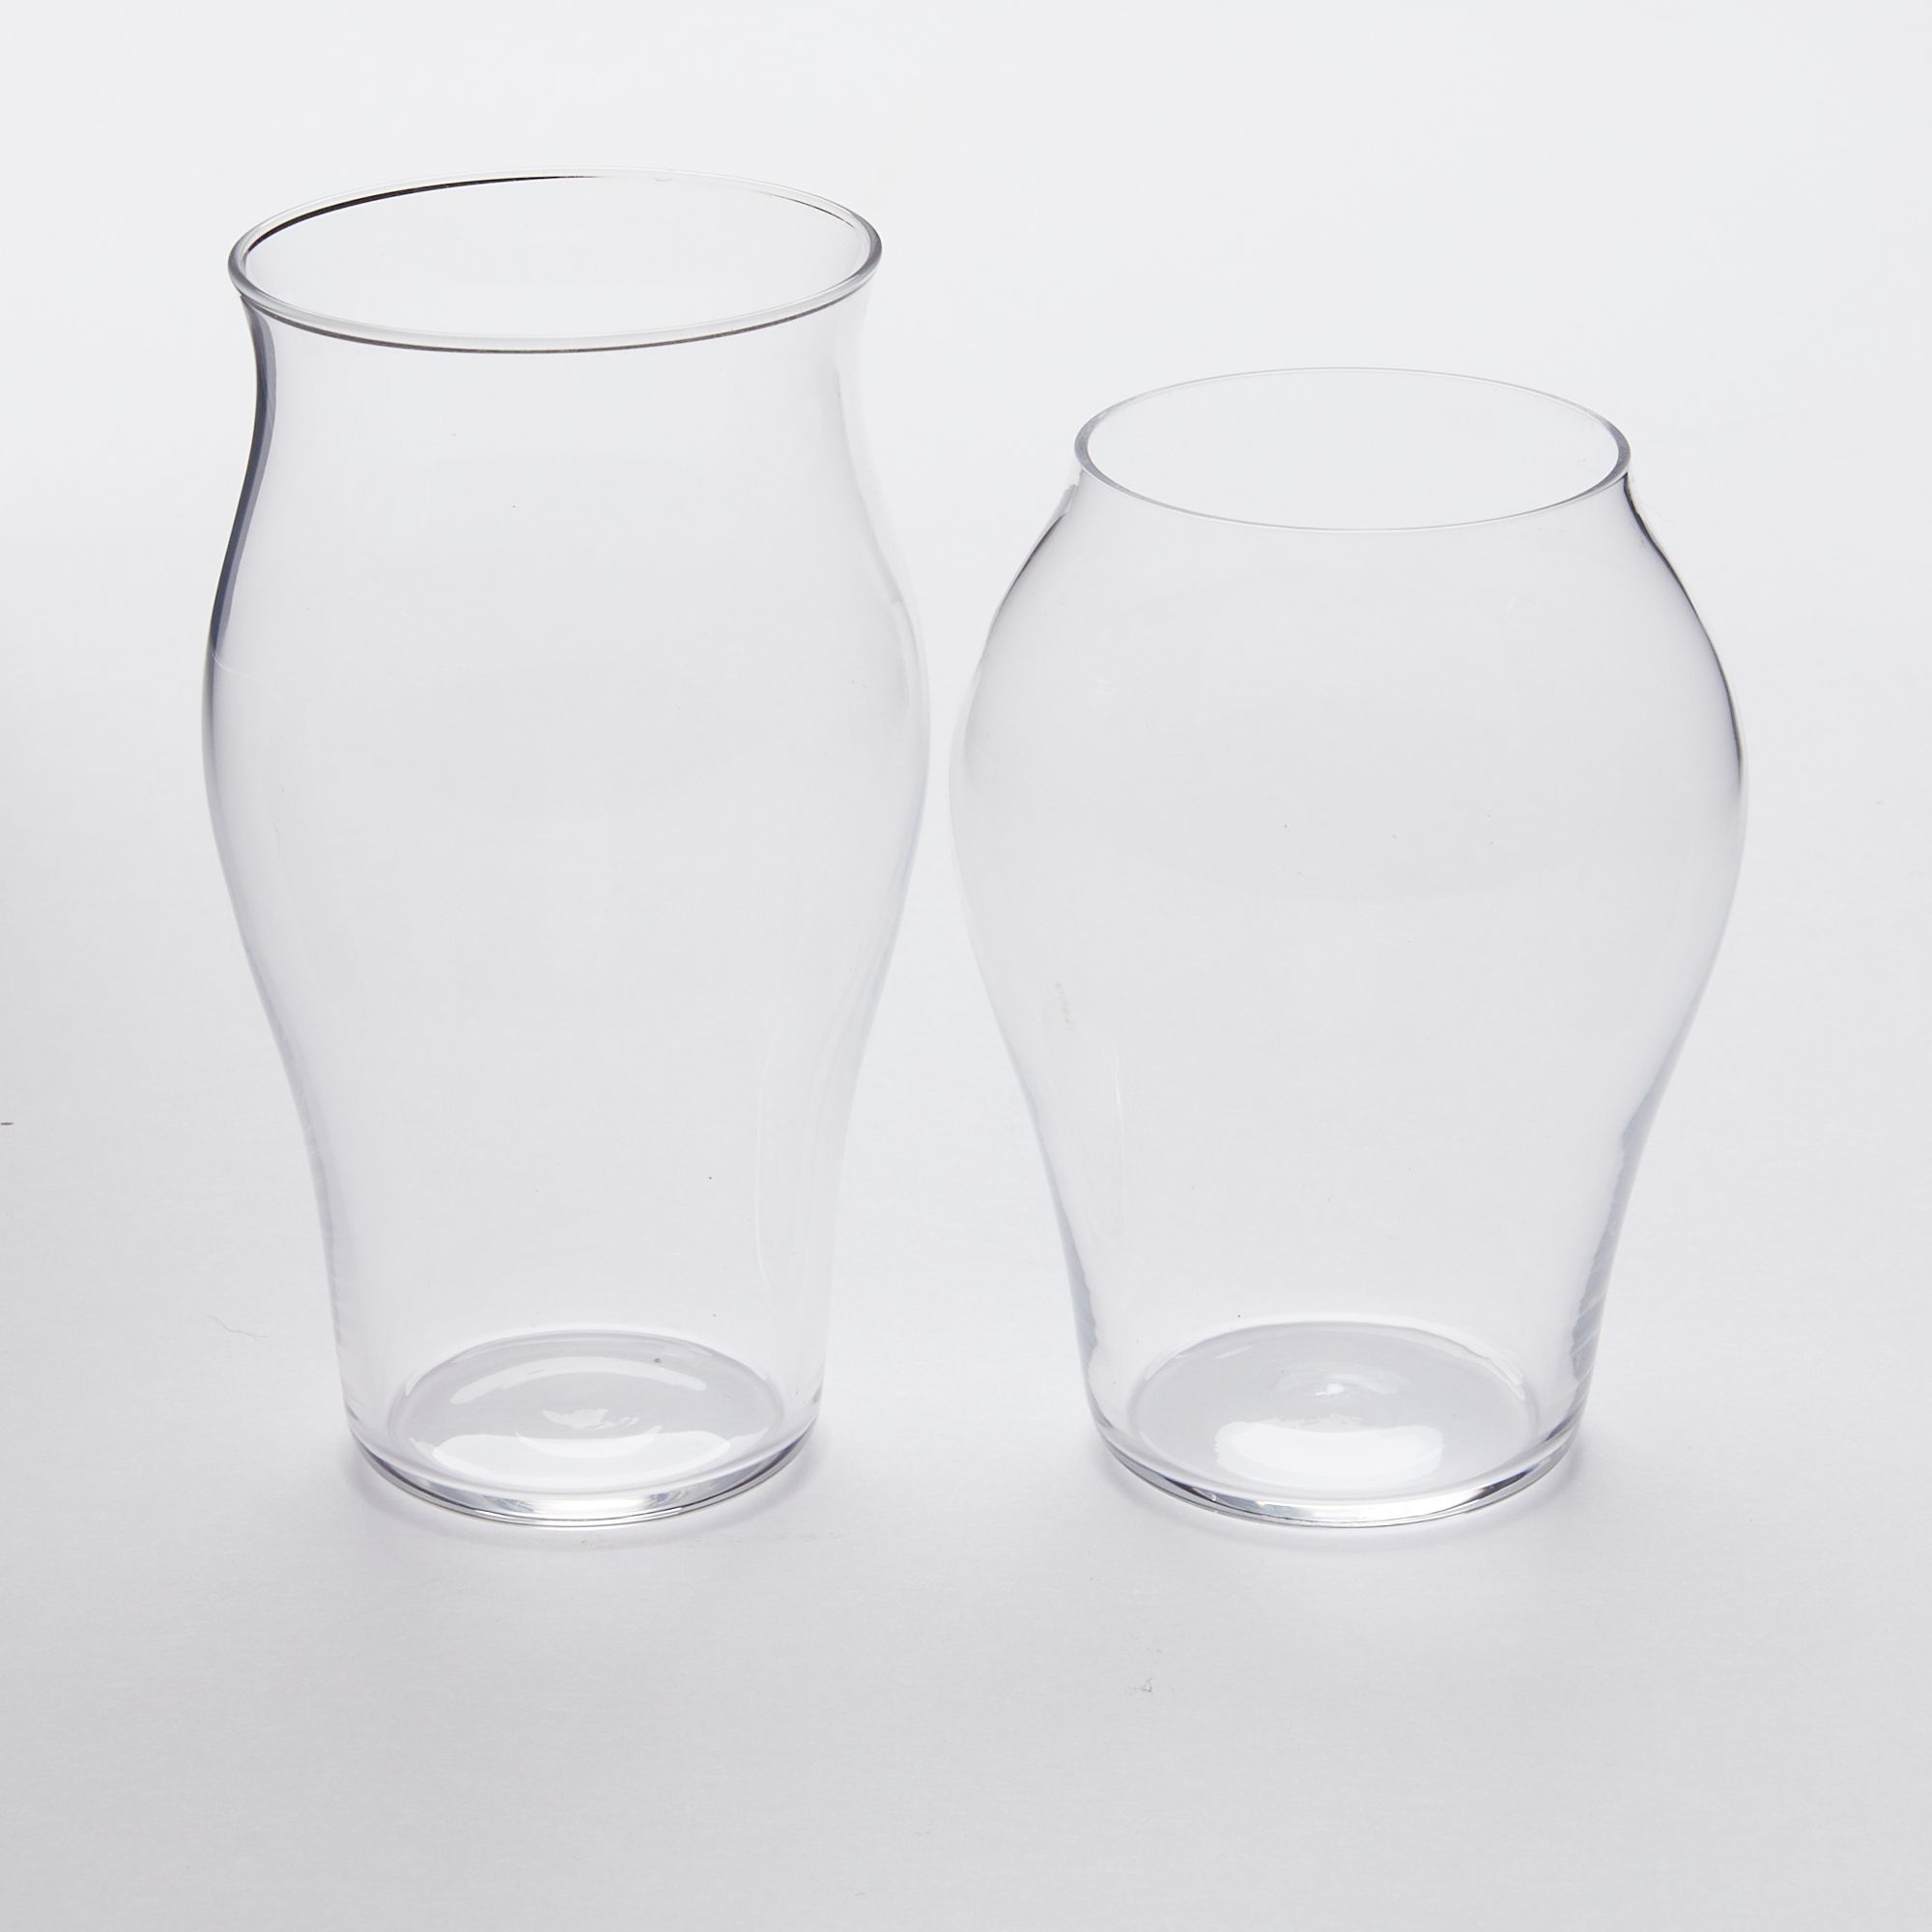 Two clear glasses, one taller than the other, both with curved bodies.